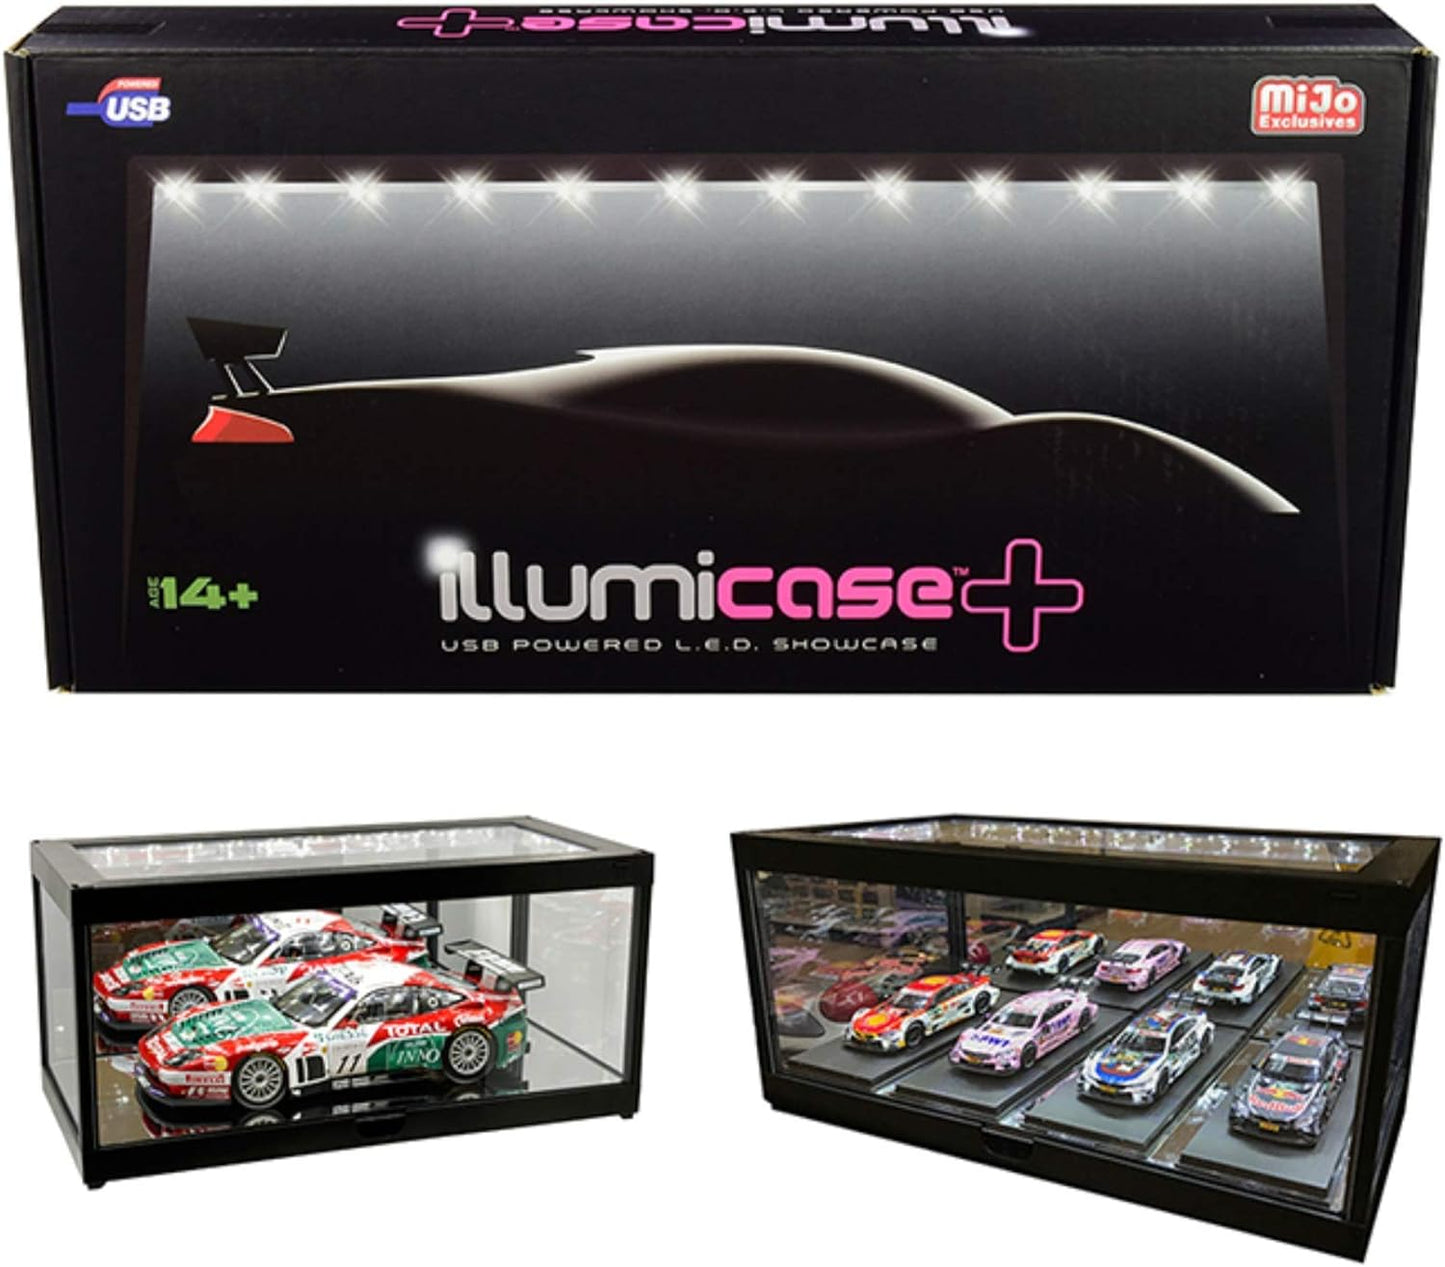 Mijo Exclusives Illumicase Plus 14 Inch Plastic Display Case with LED Lighting and Mirror 1:18